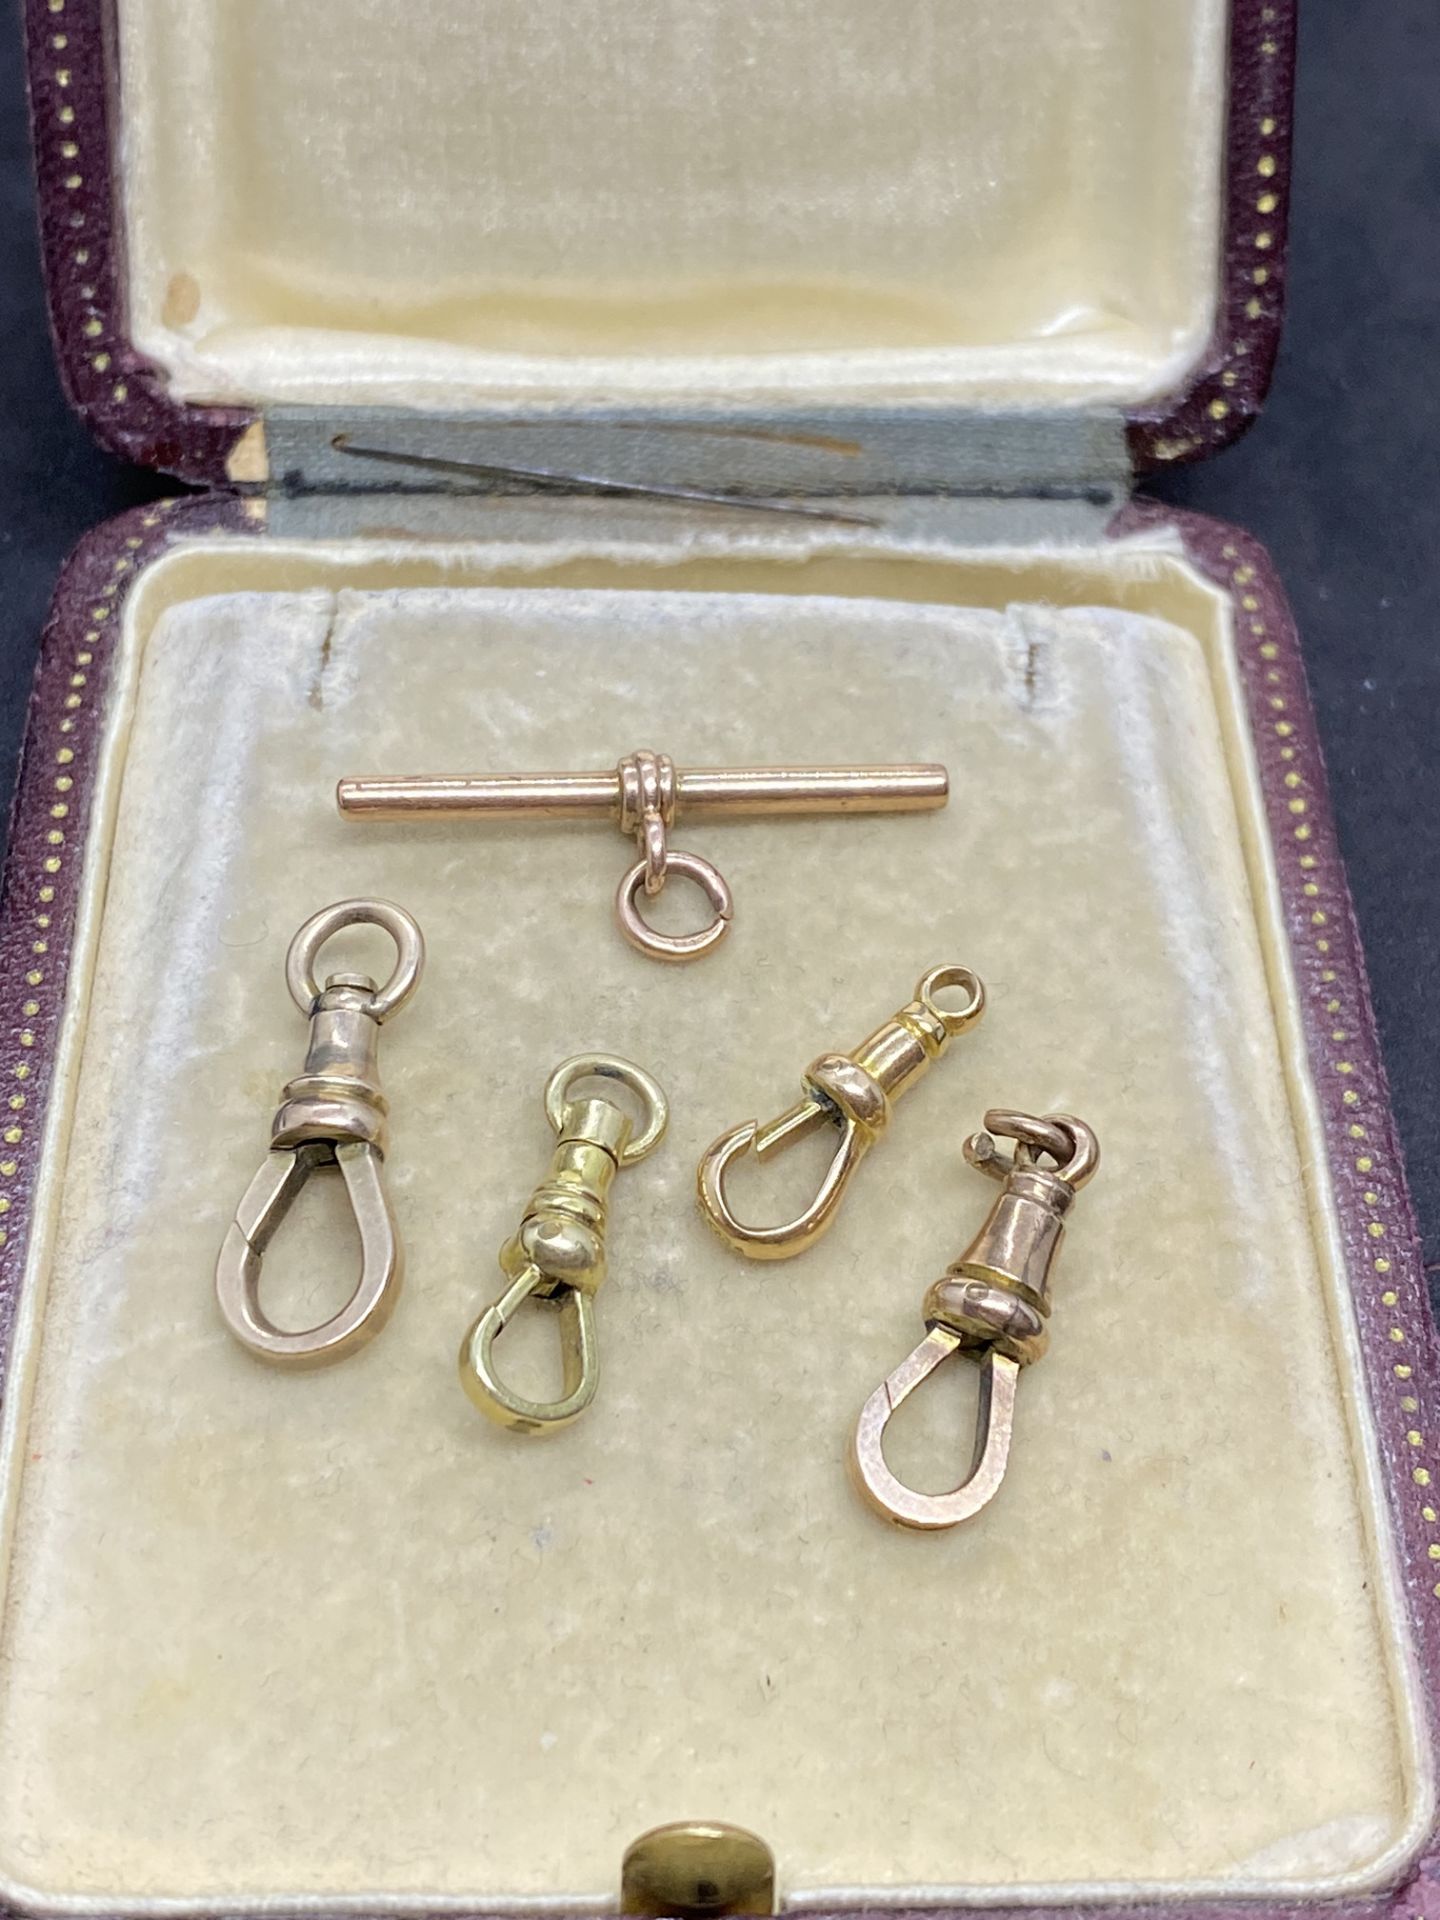 4 x 9ct GOLD CLASPS & T BAR